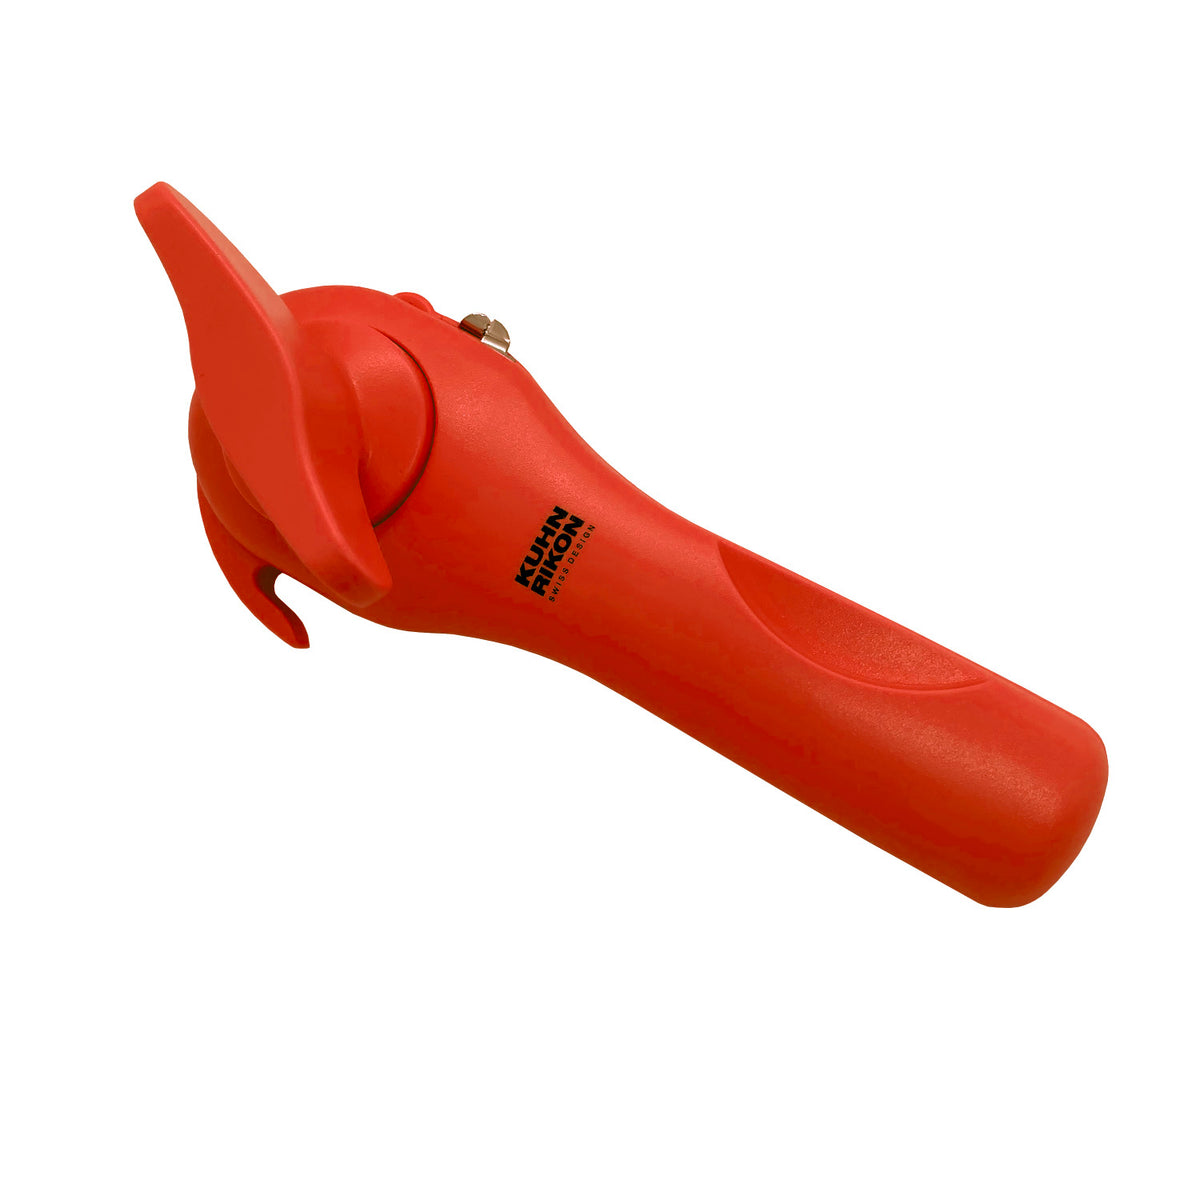 Kuhn Rikon Safety Lid Lifter Can Opener